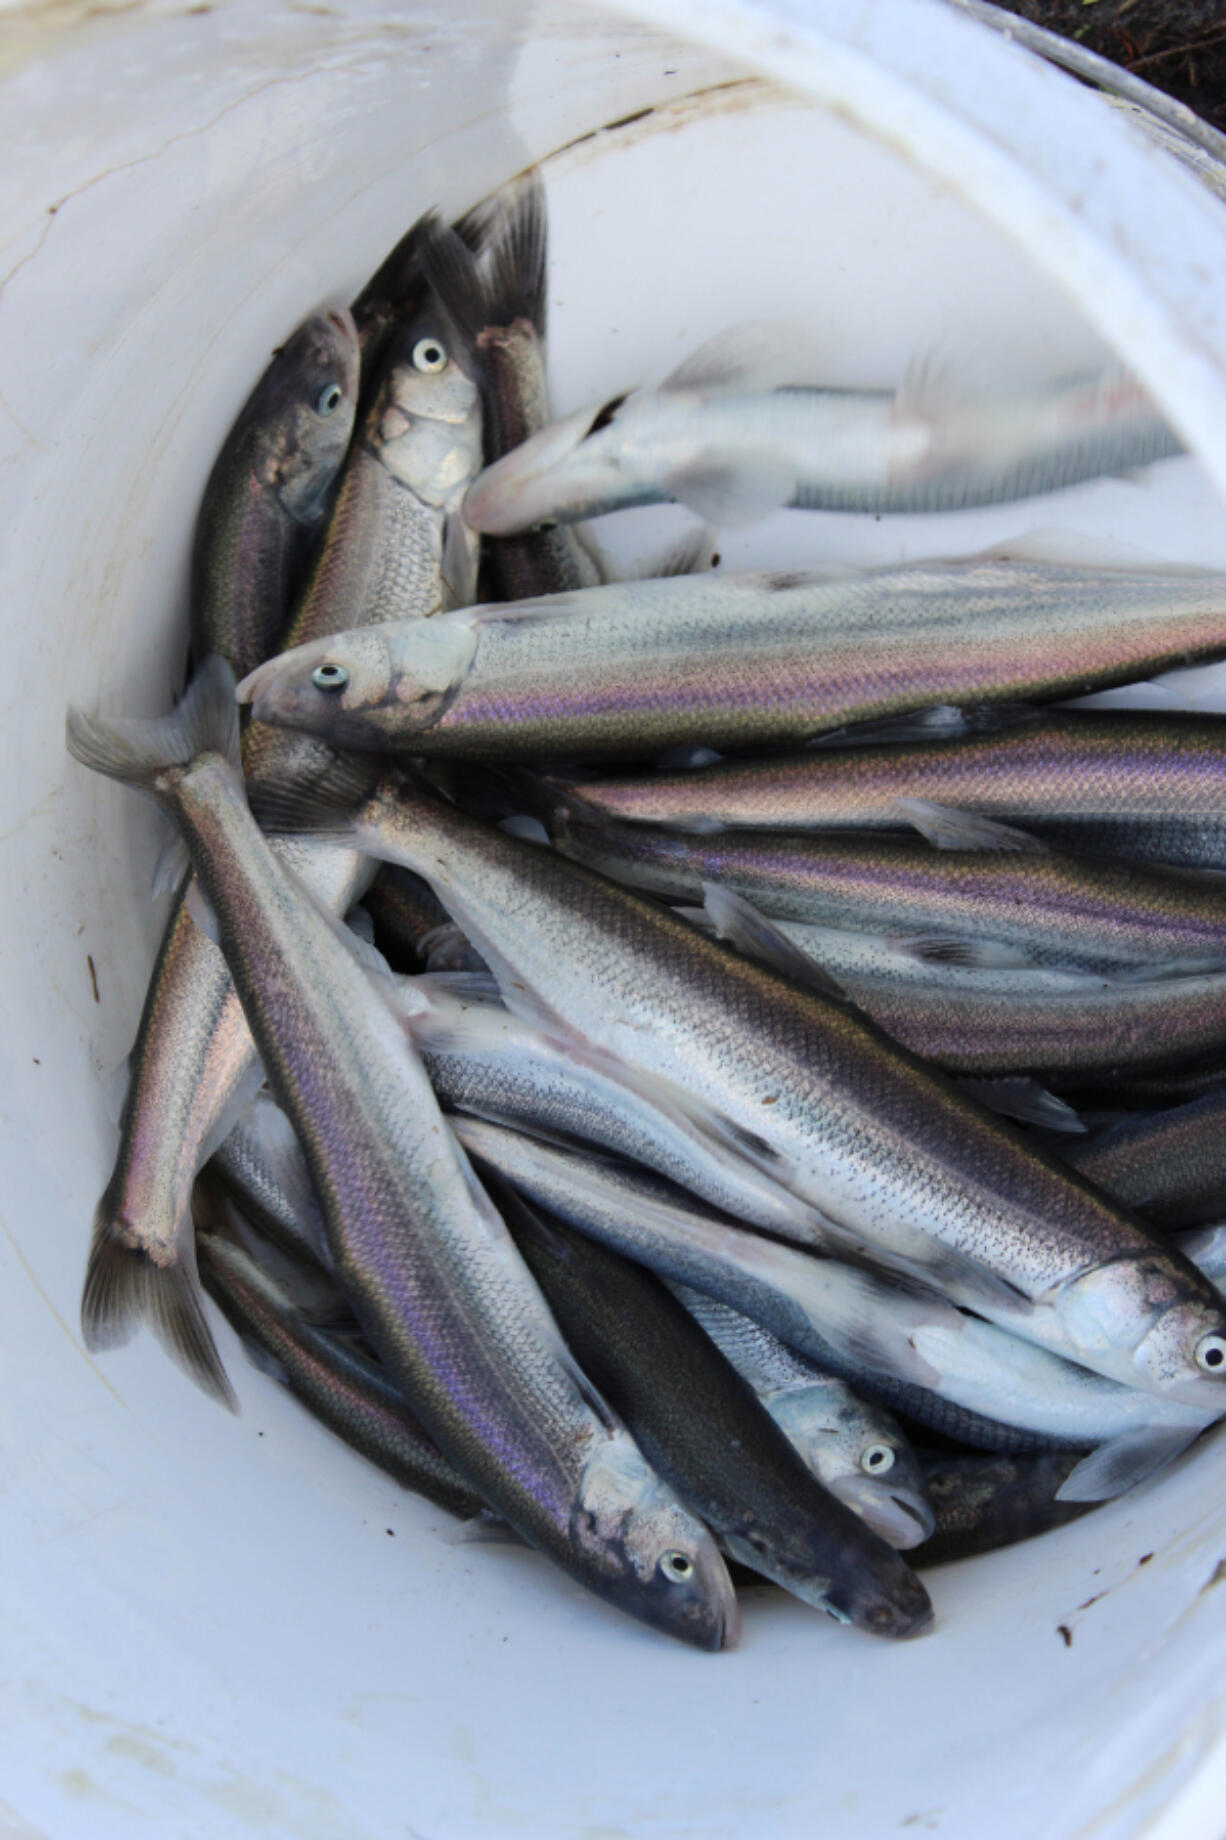 Smelt are a small, oily fish that are a popular meal smoked or cooked, and many of the fish that are caught are used for bait to attract larger fish, such as sturgeon.